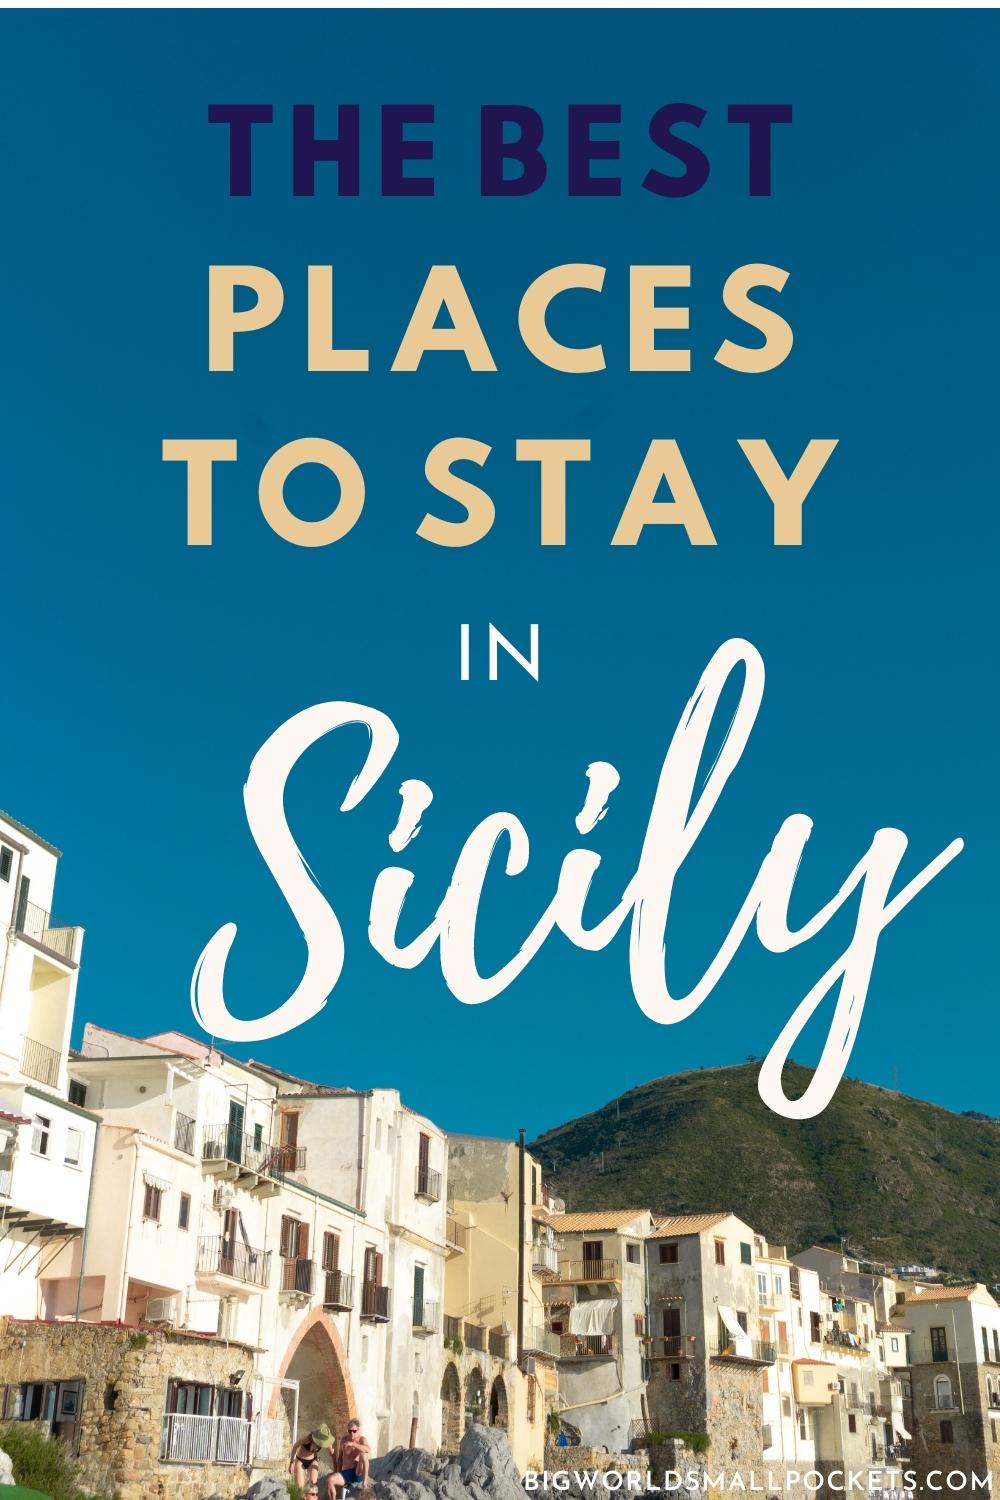 The Best Places to Stay in Sicily